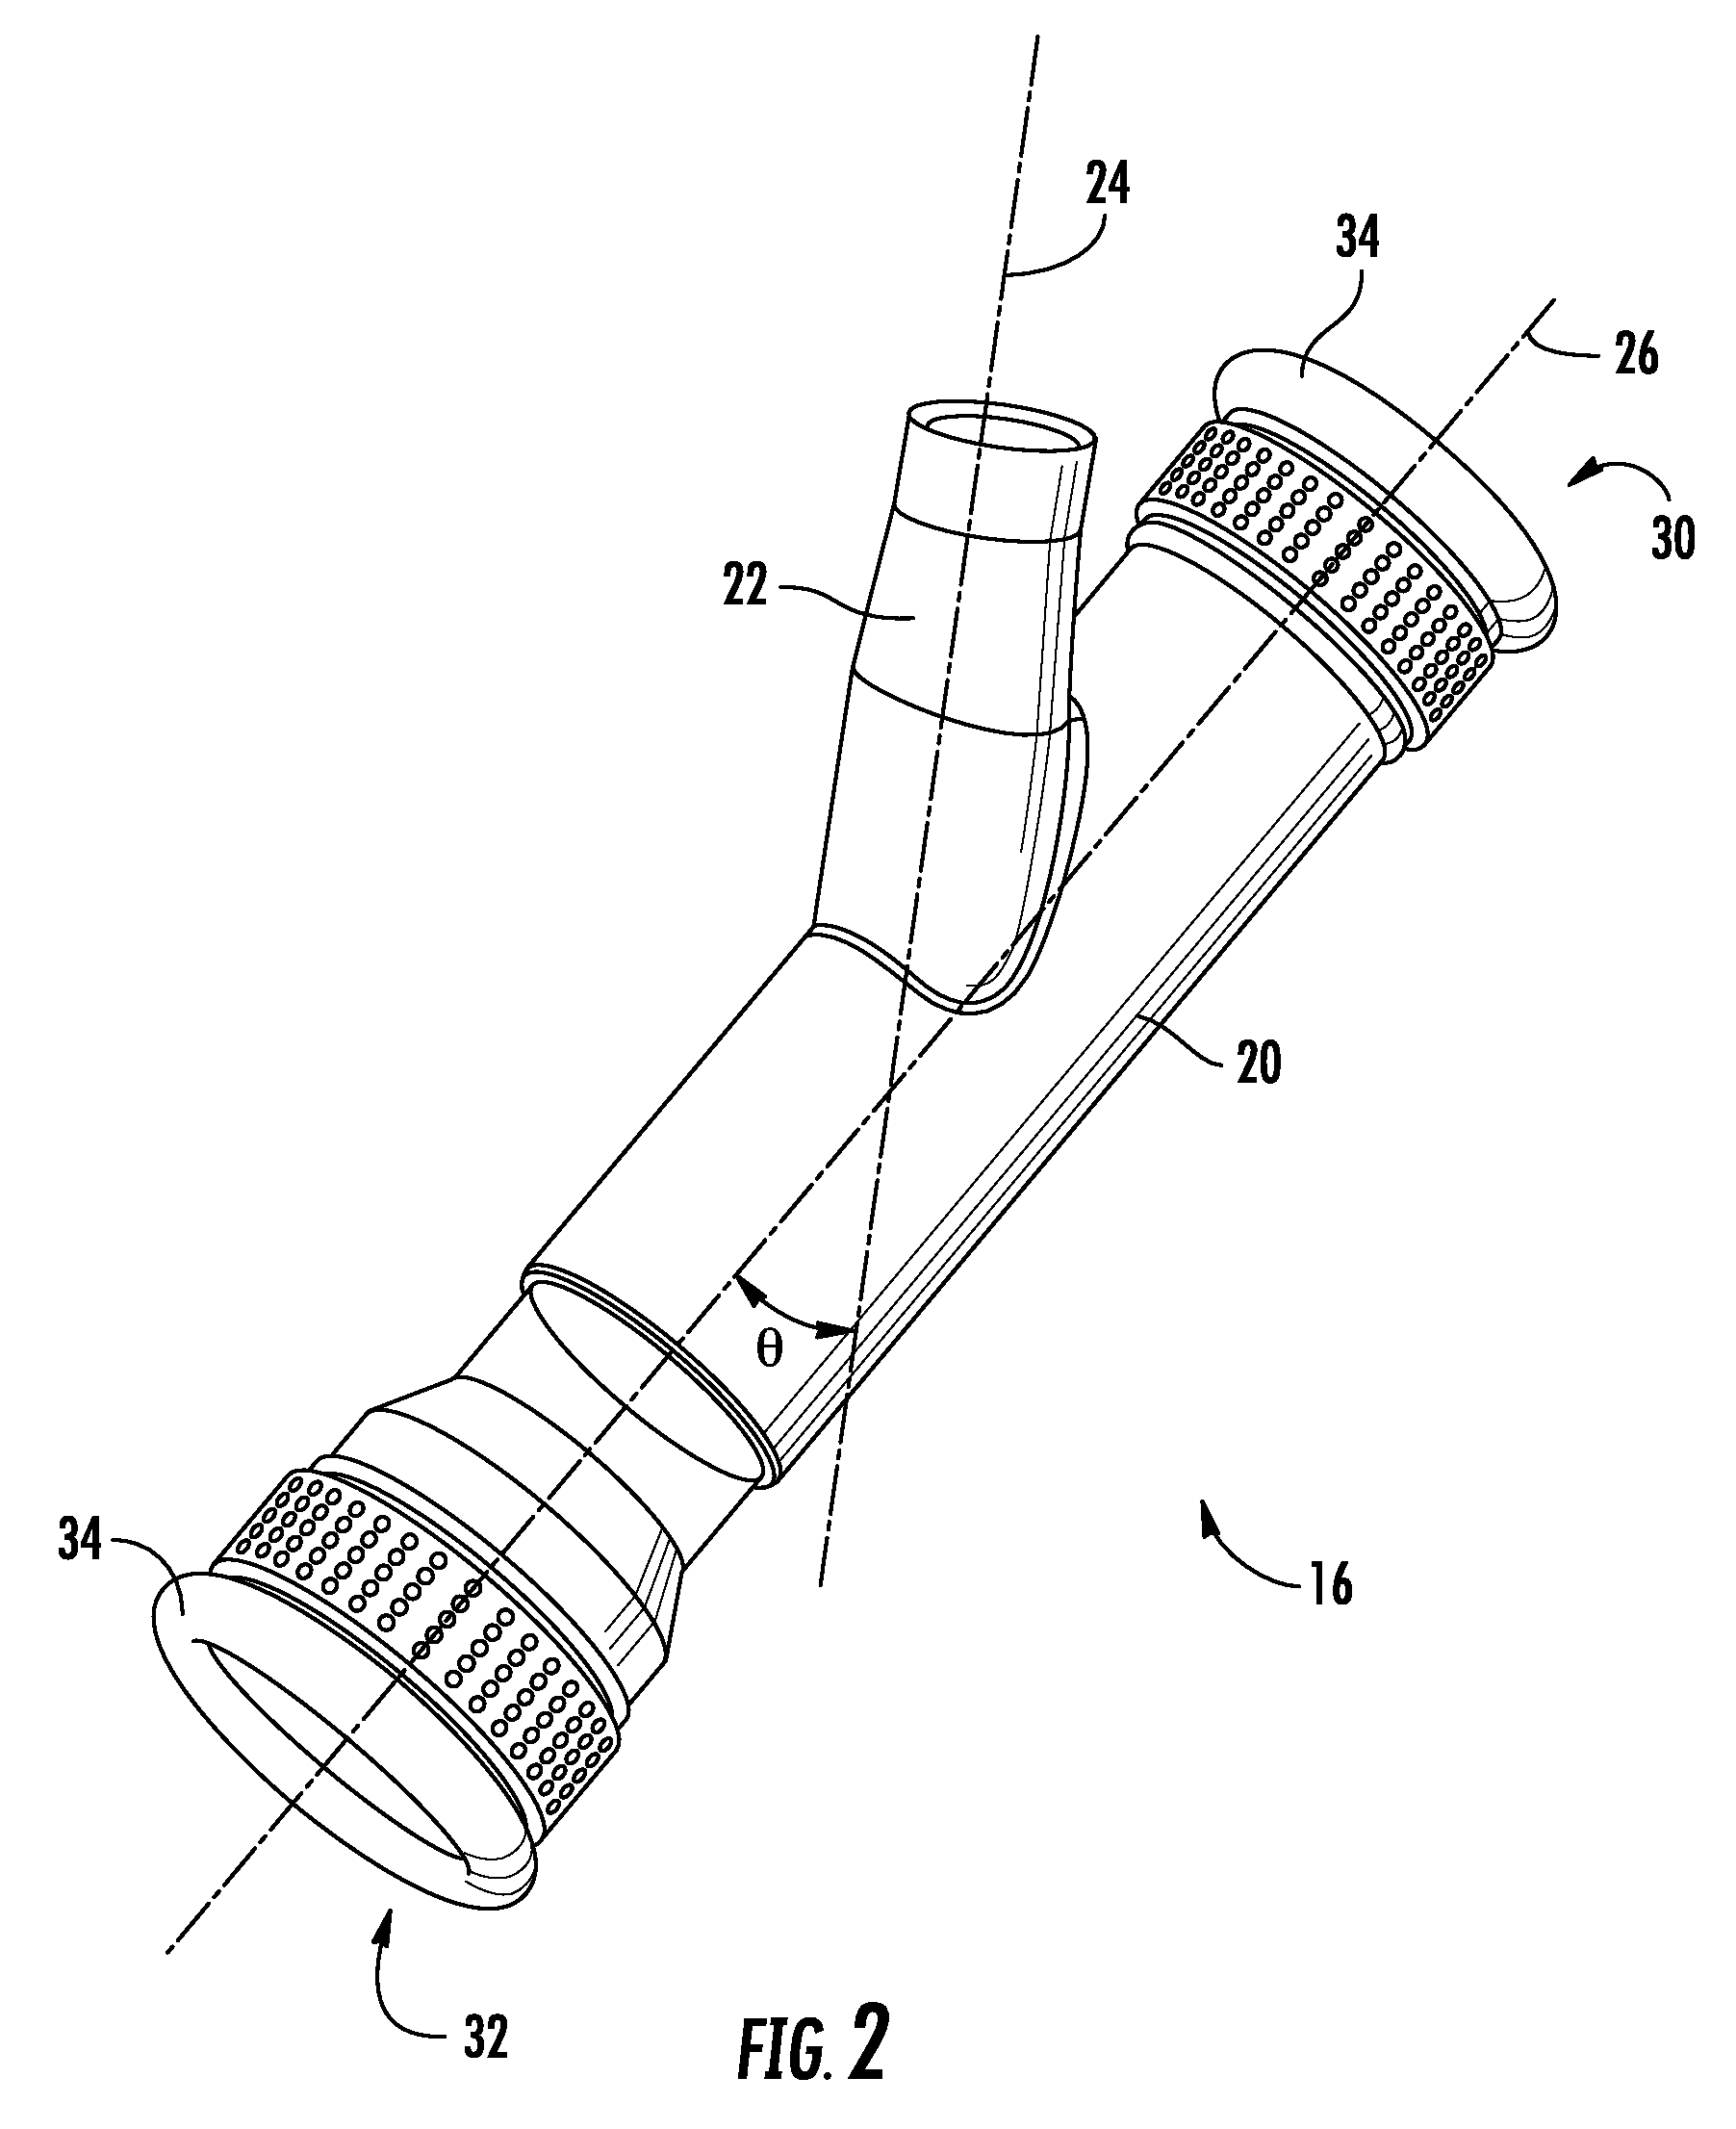 Method and apparatus for bypass graft